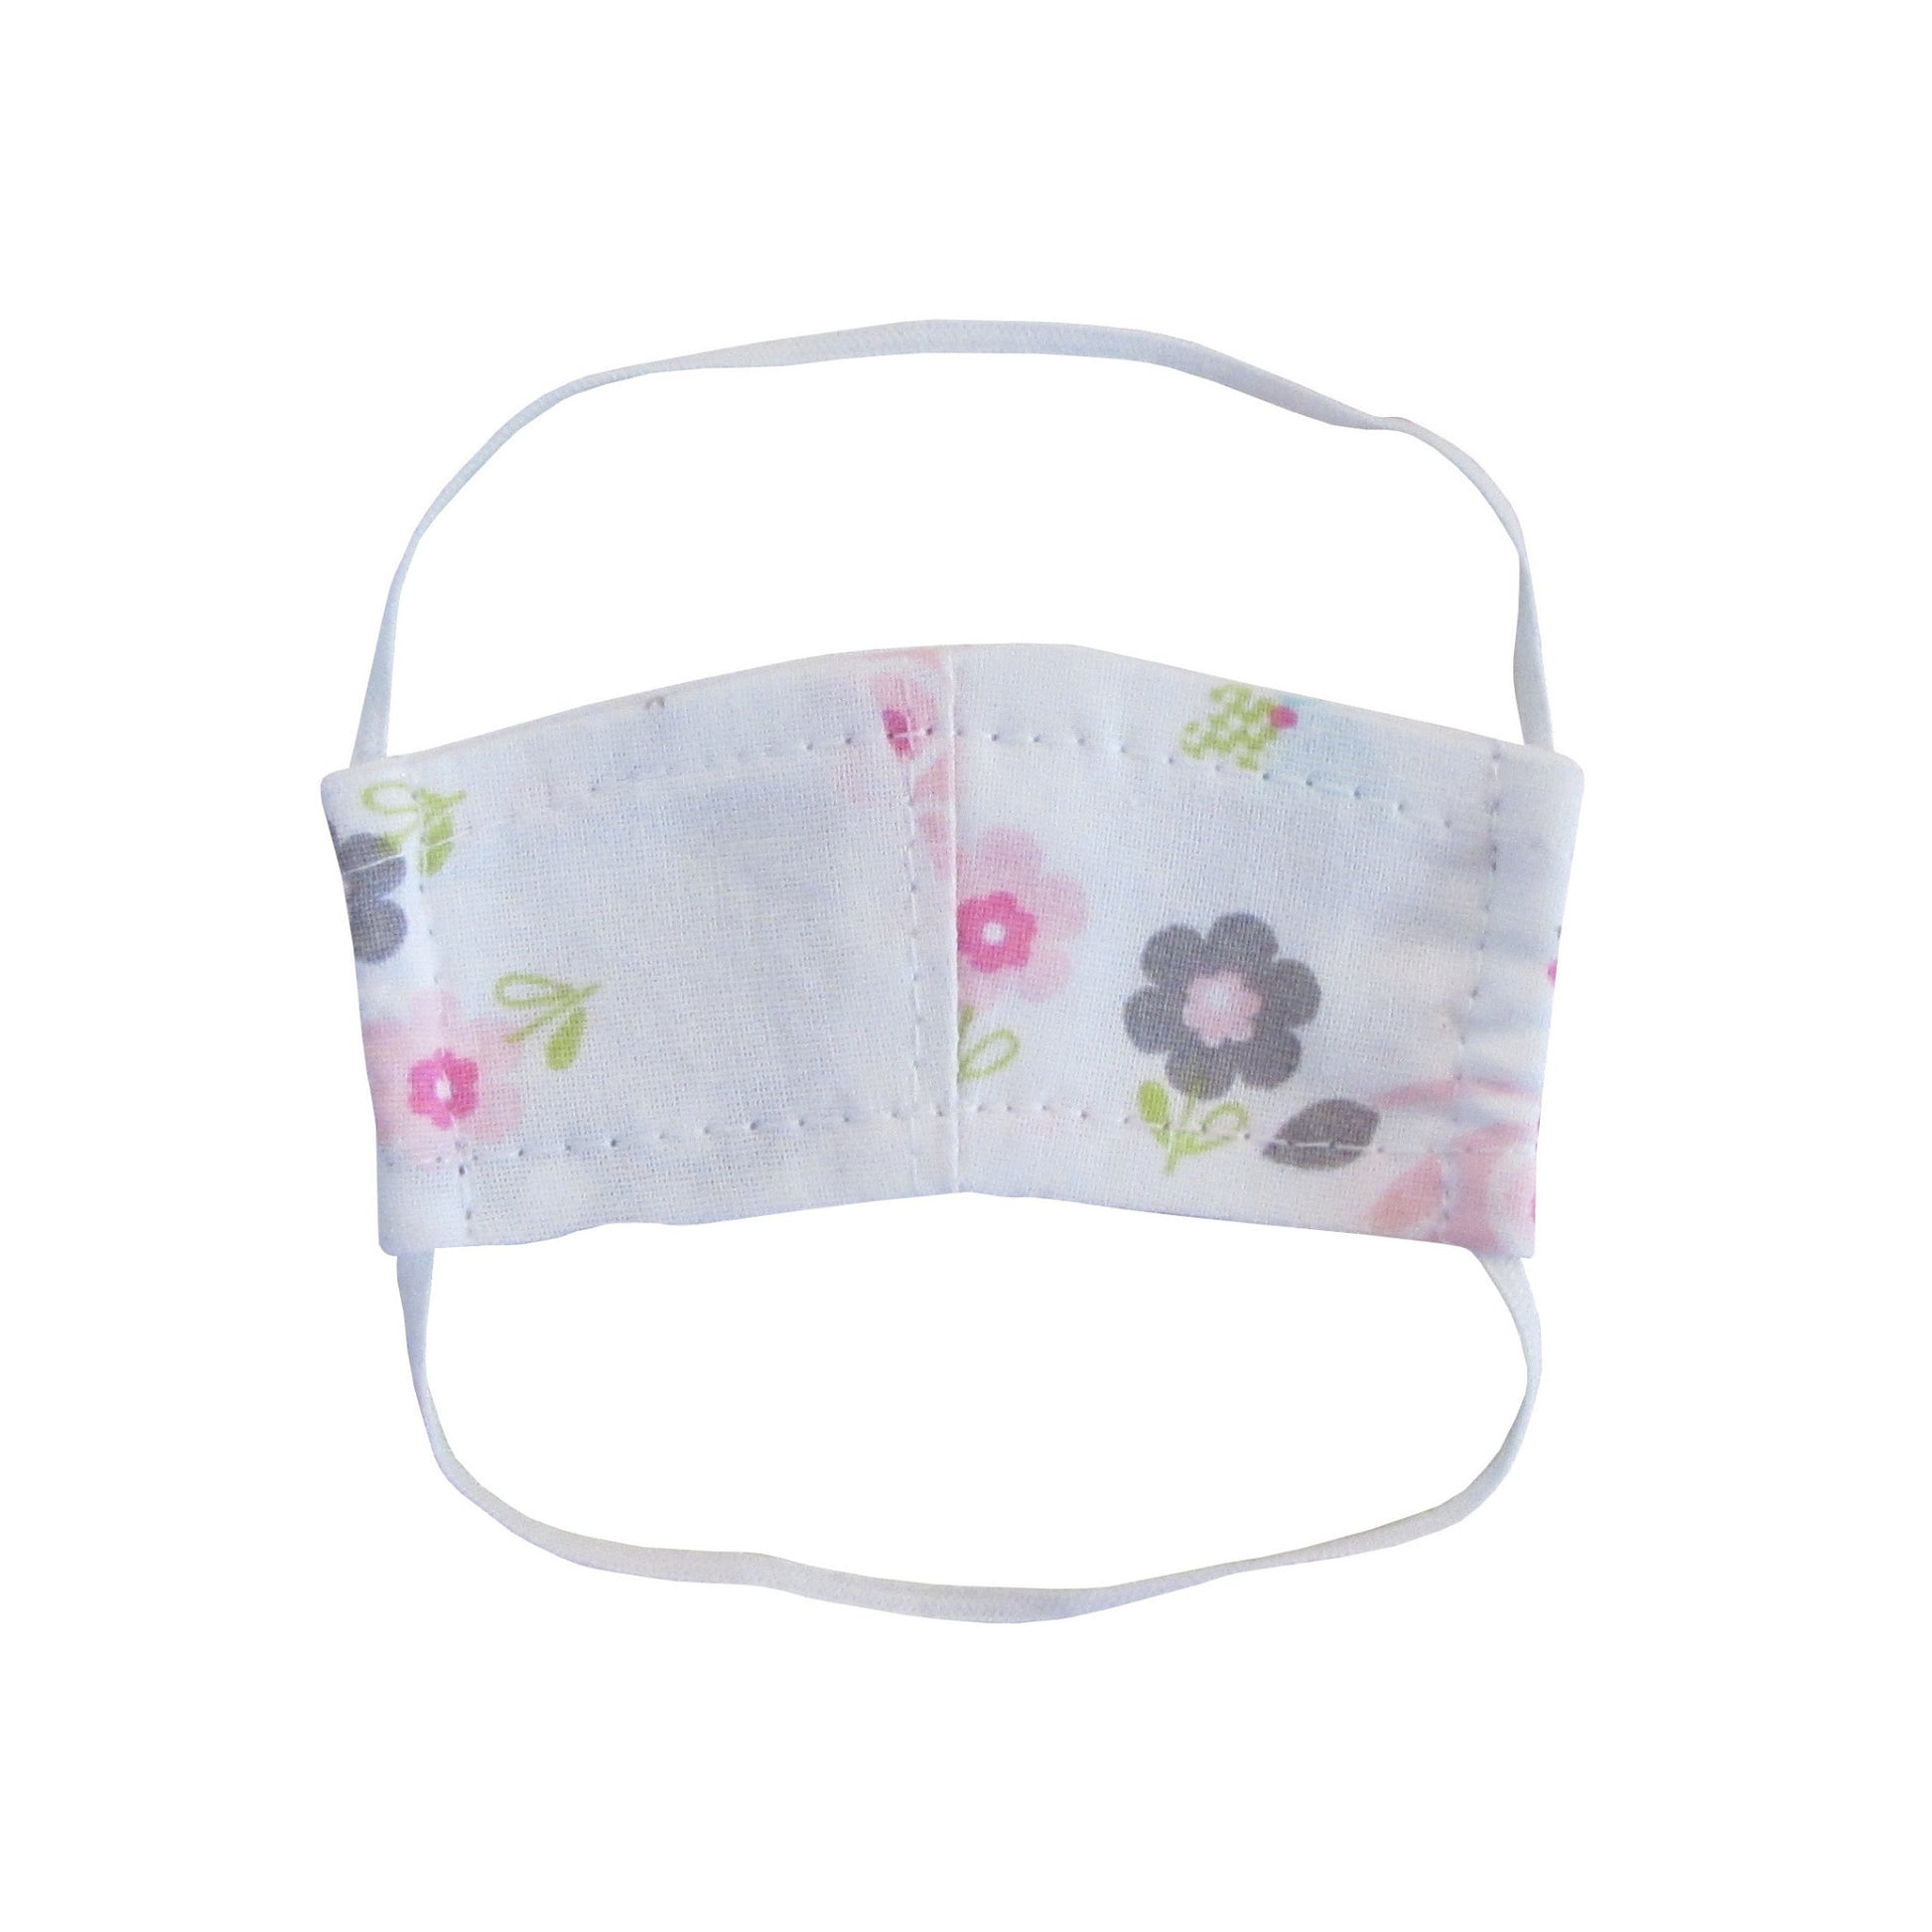 Elephant, Bird, and Floral Print Face Mask for 18-inch dolls Flat